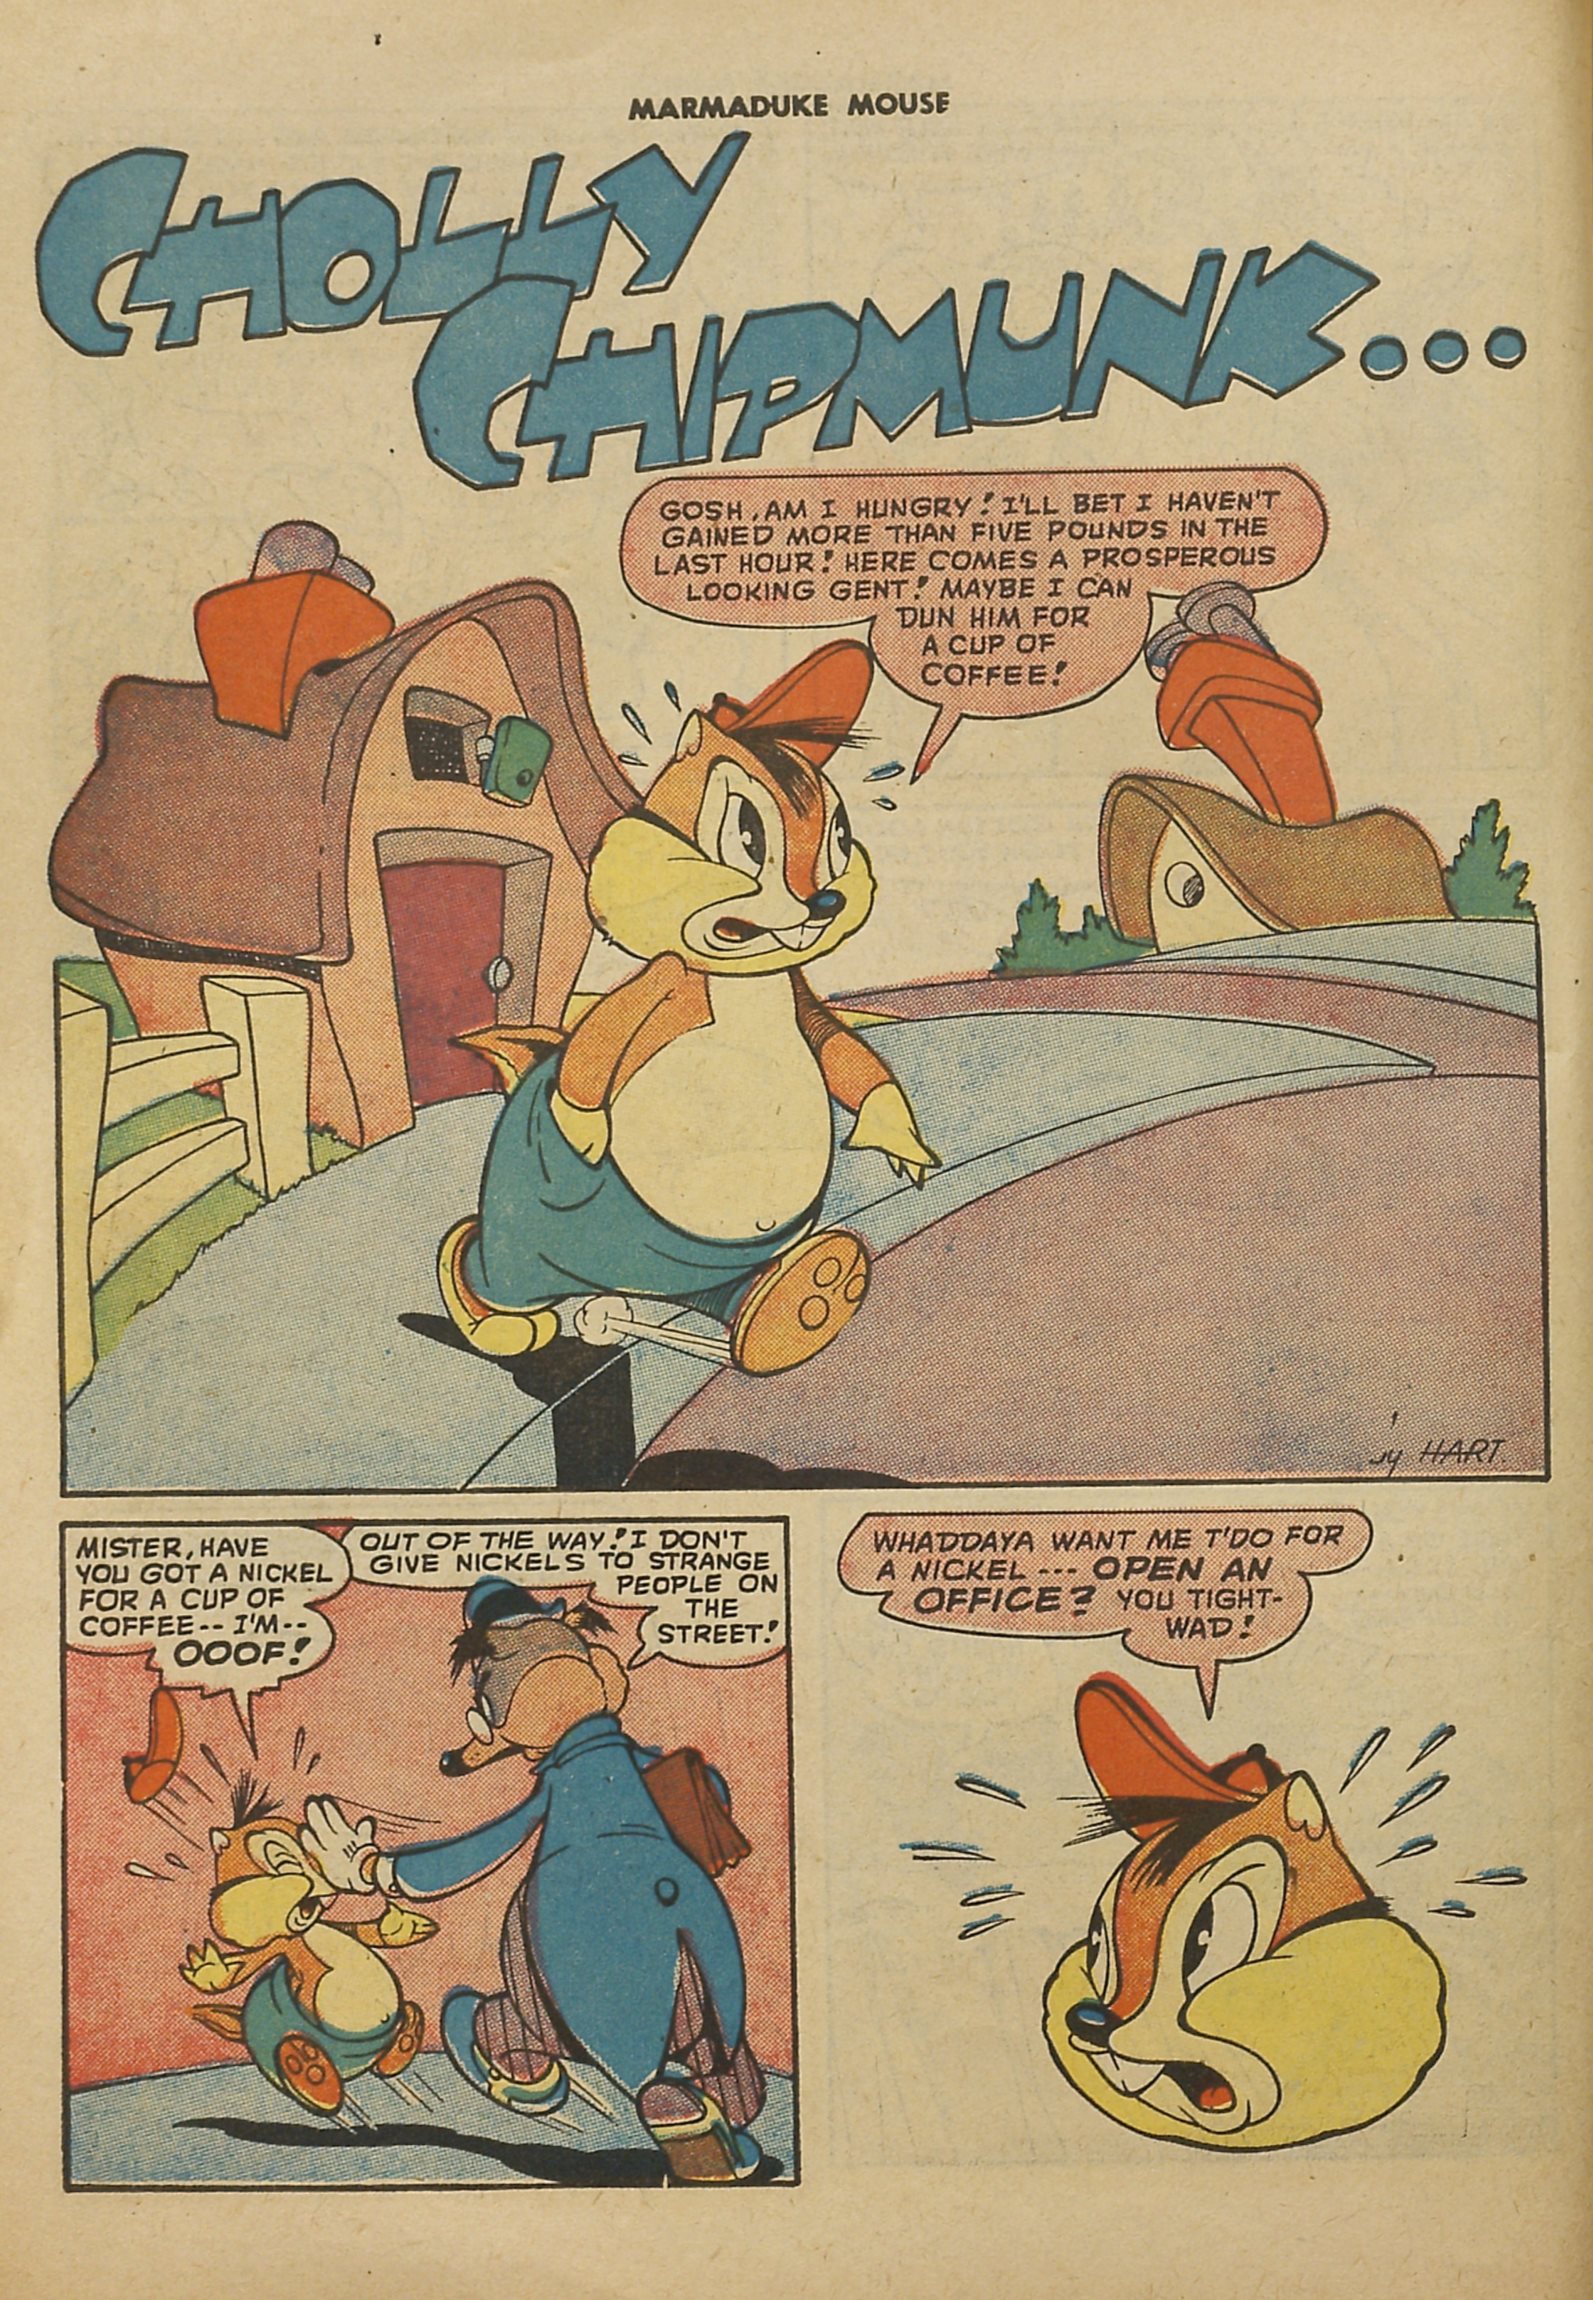 Read online Marmaduke Mouse comic -  Issue #9 - 10